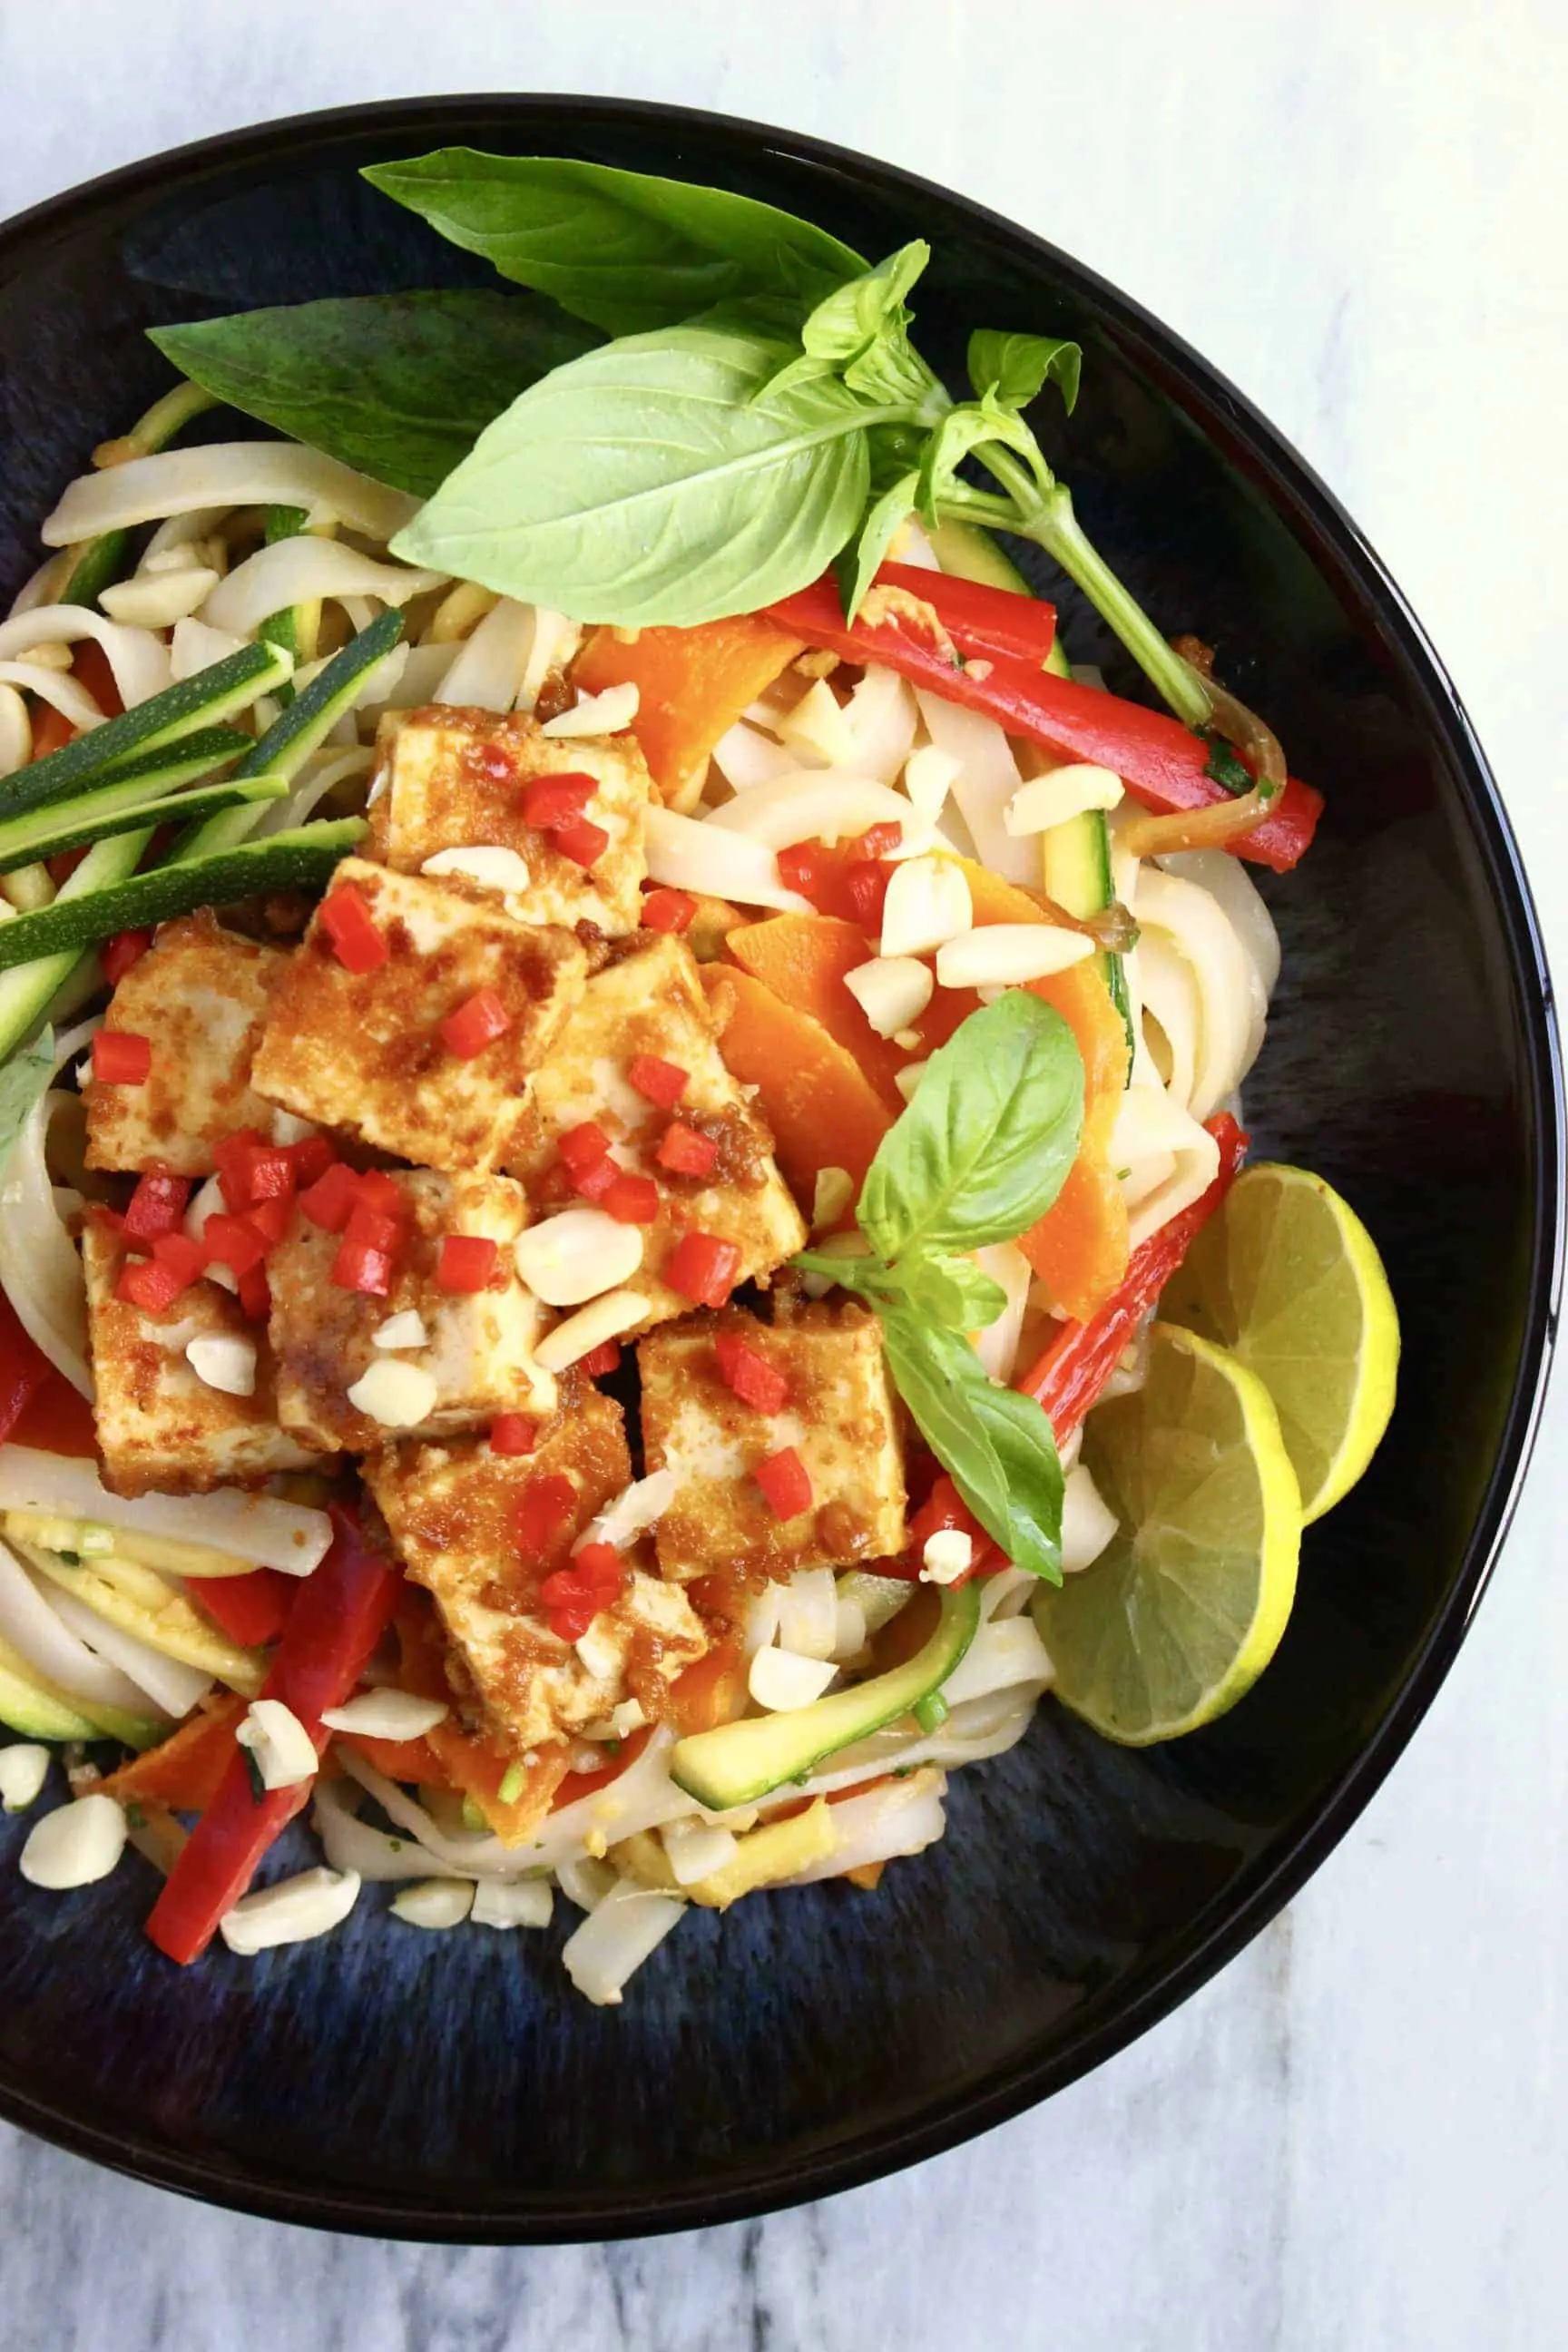 Vegan tofu pad Thai with vegetables and herbs and chopped peanuts in a black bowl